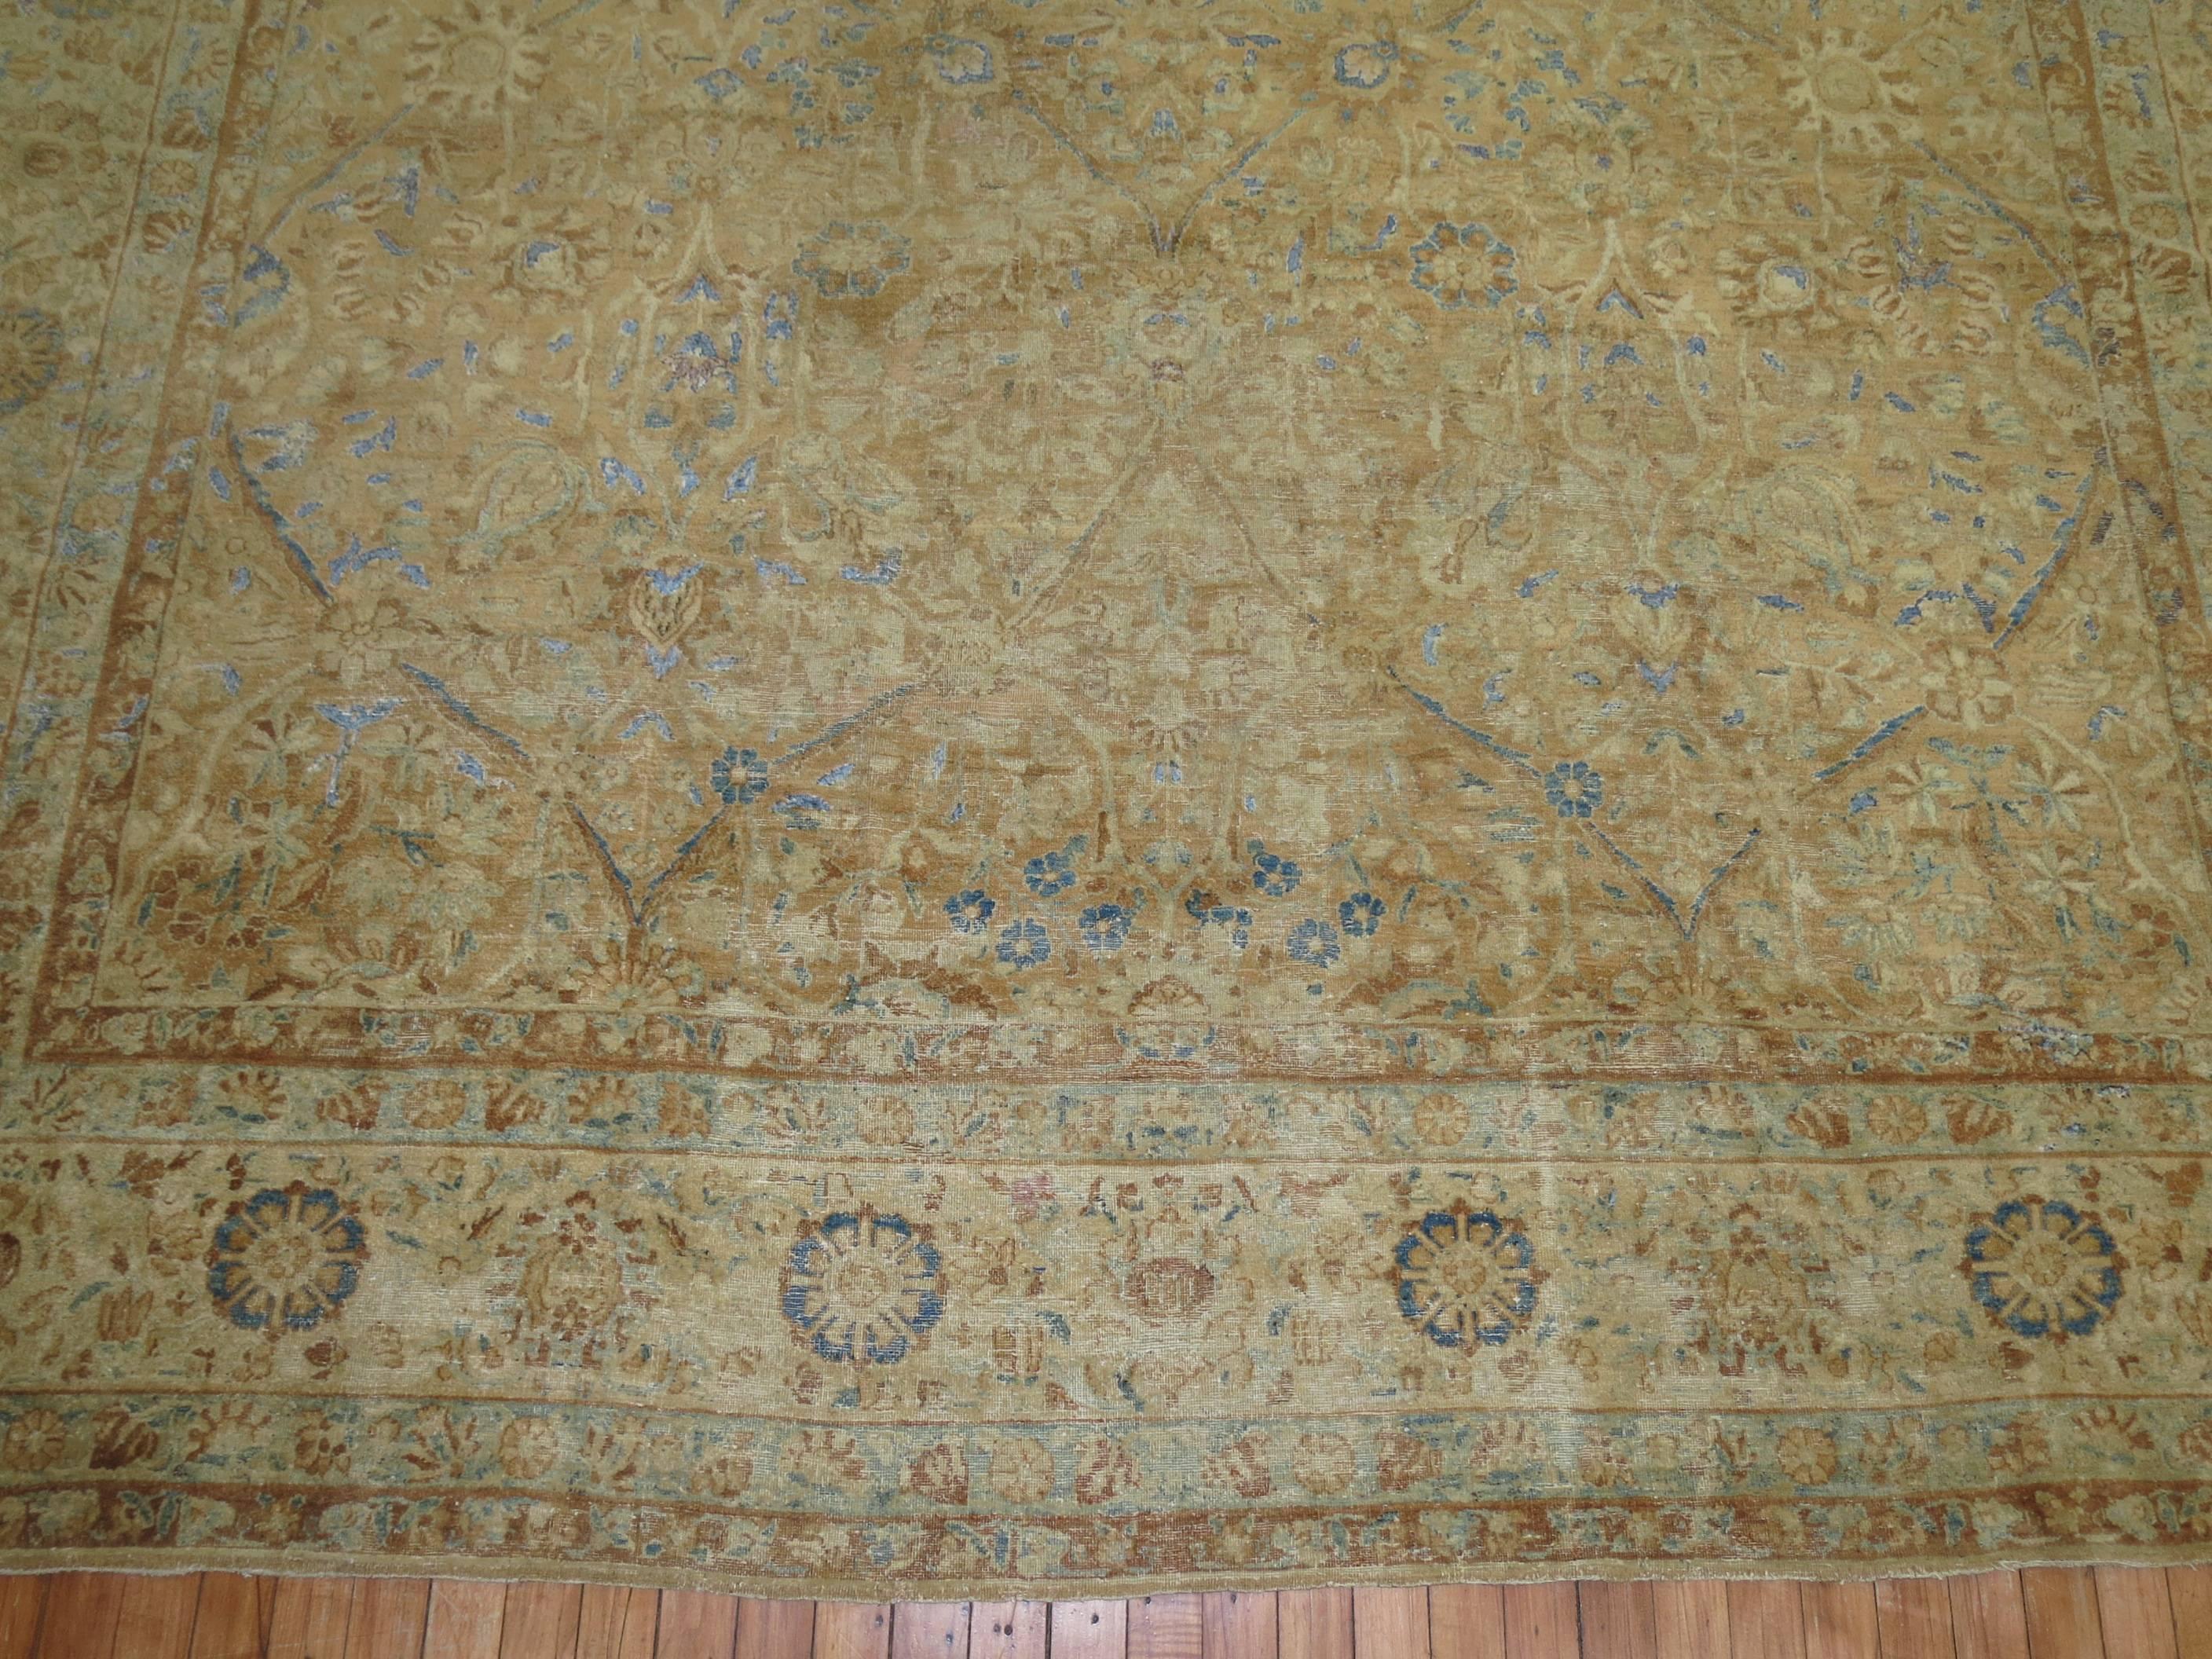 Hand-Knotted Fancy Robin Eggs Blue Light Brown Antique Persian Kerman Room Size Rug